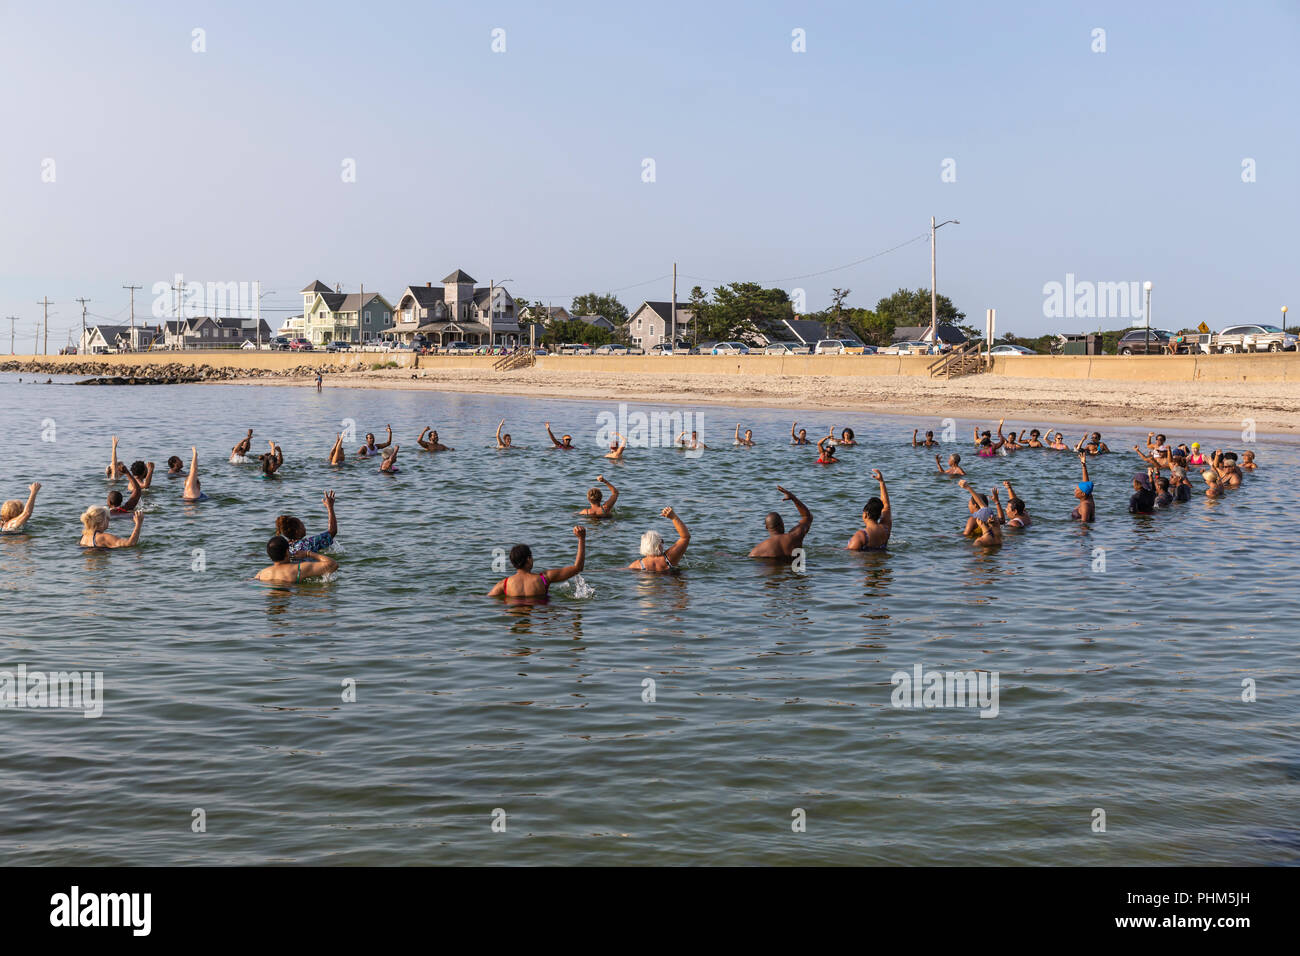 The 'Polar Bears' gather for a morning swim, exercise, and prayer in the water off Inkwell Beach in Oak Bluffs, Massachusetts on Martha's Vineyard. Stock Photo